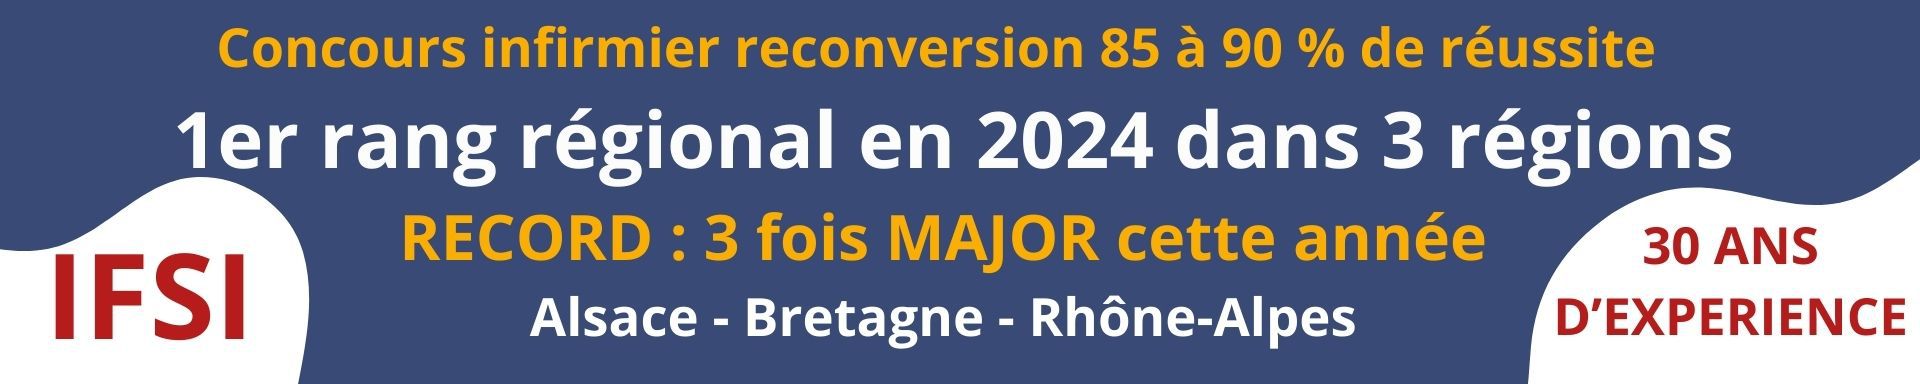 concours ifsi 2024 environnement